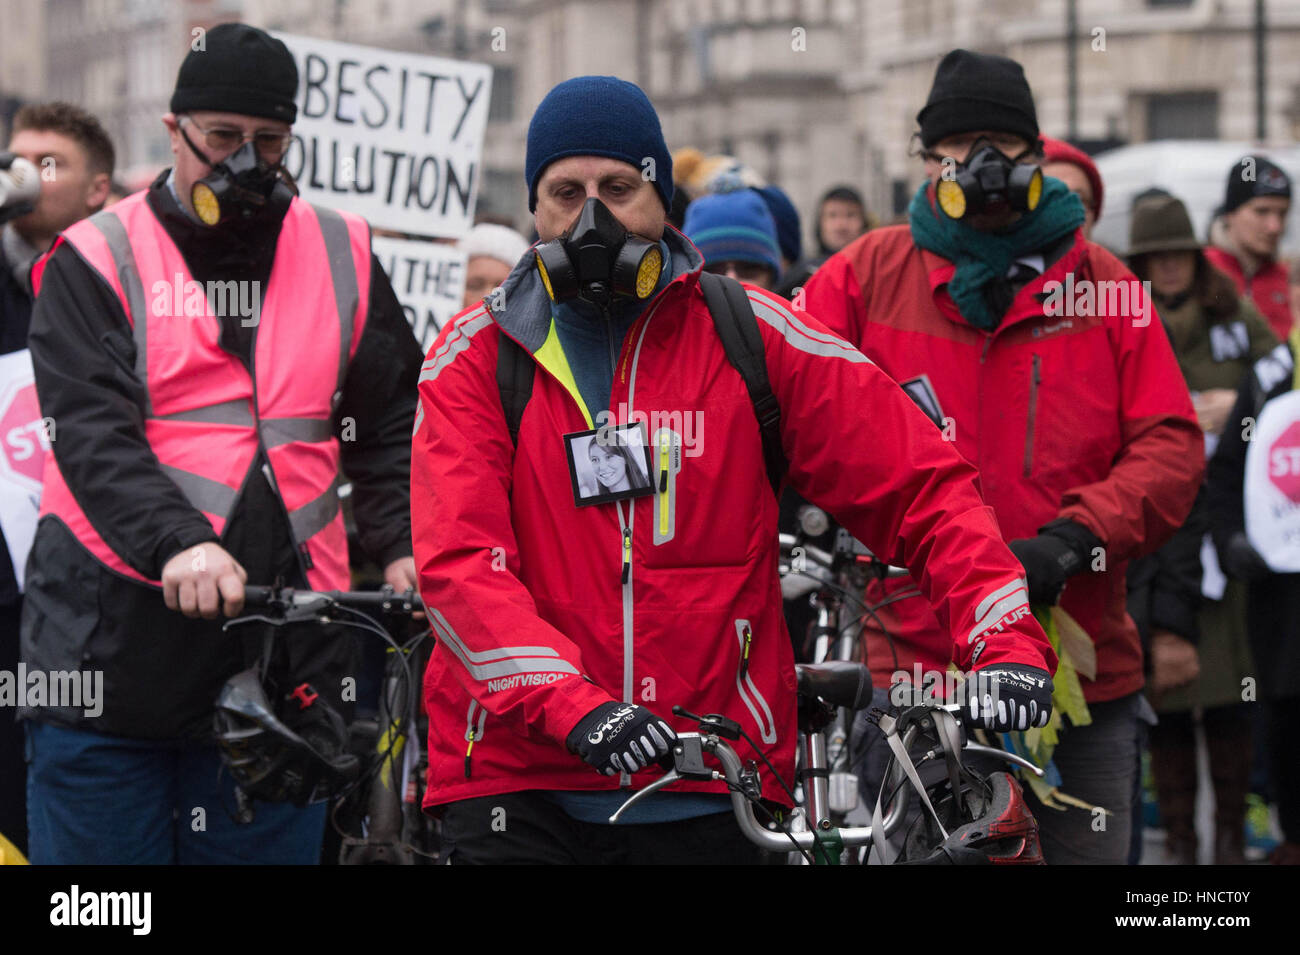 Cyclists protest through central London campaigning for safer roads in the capital. Stock Photo